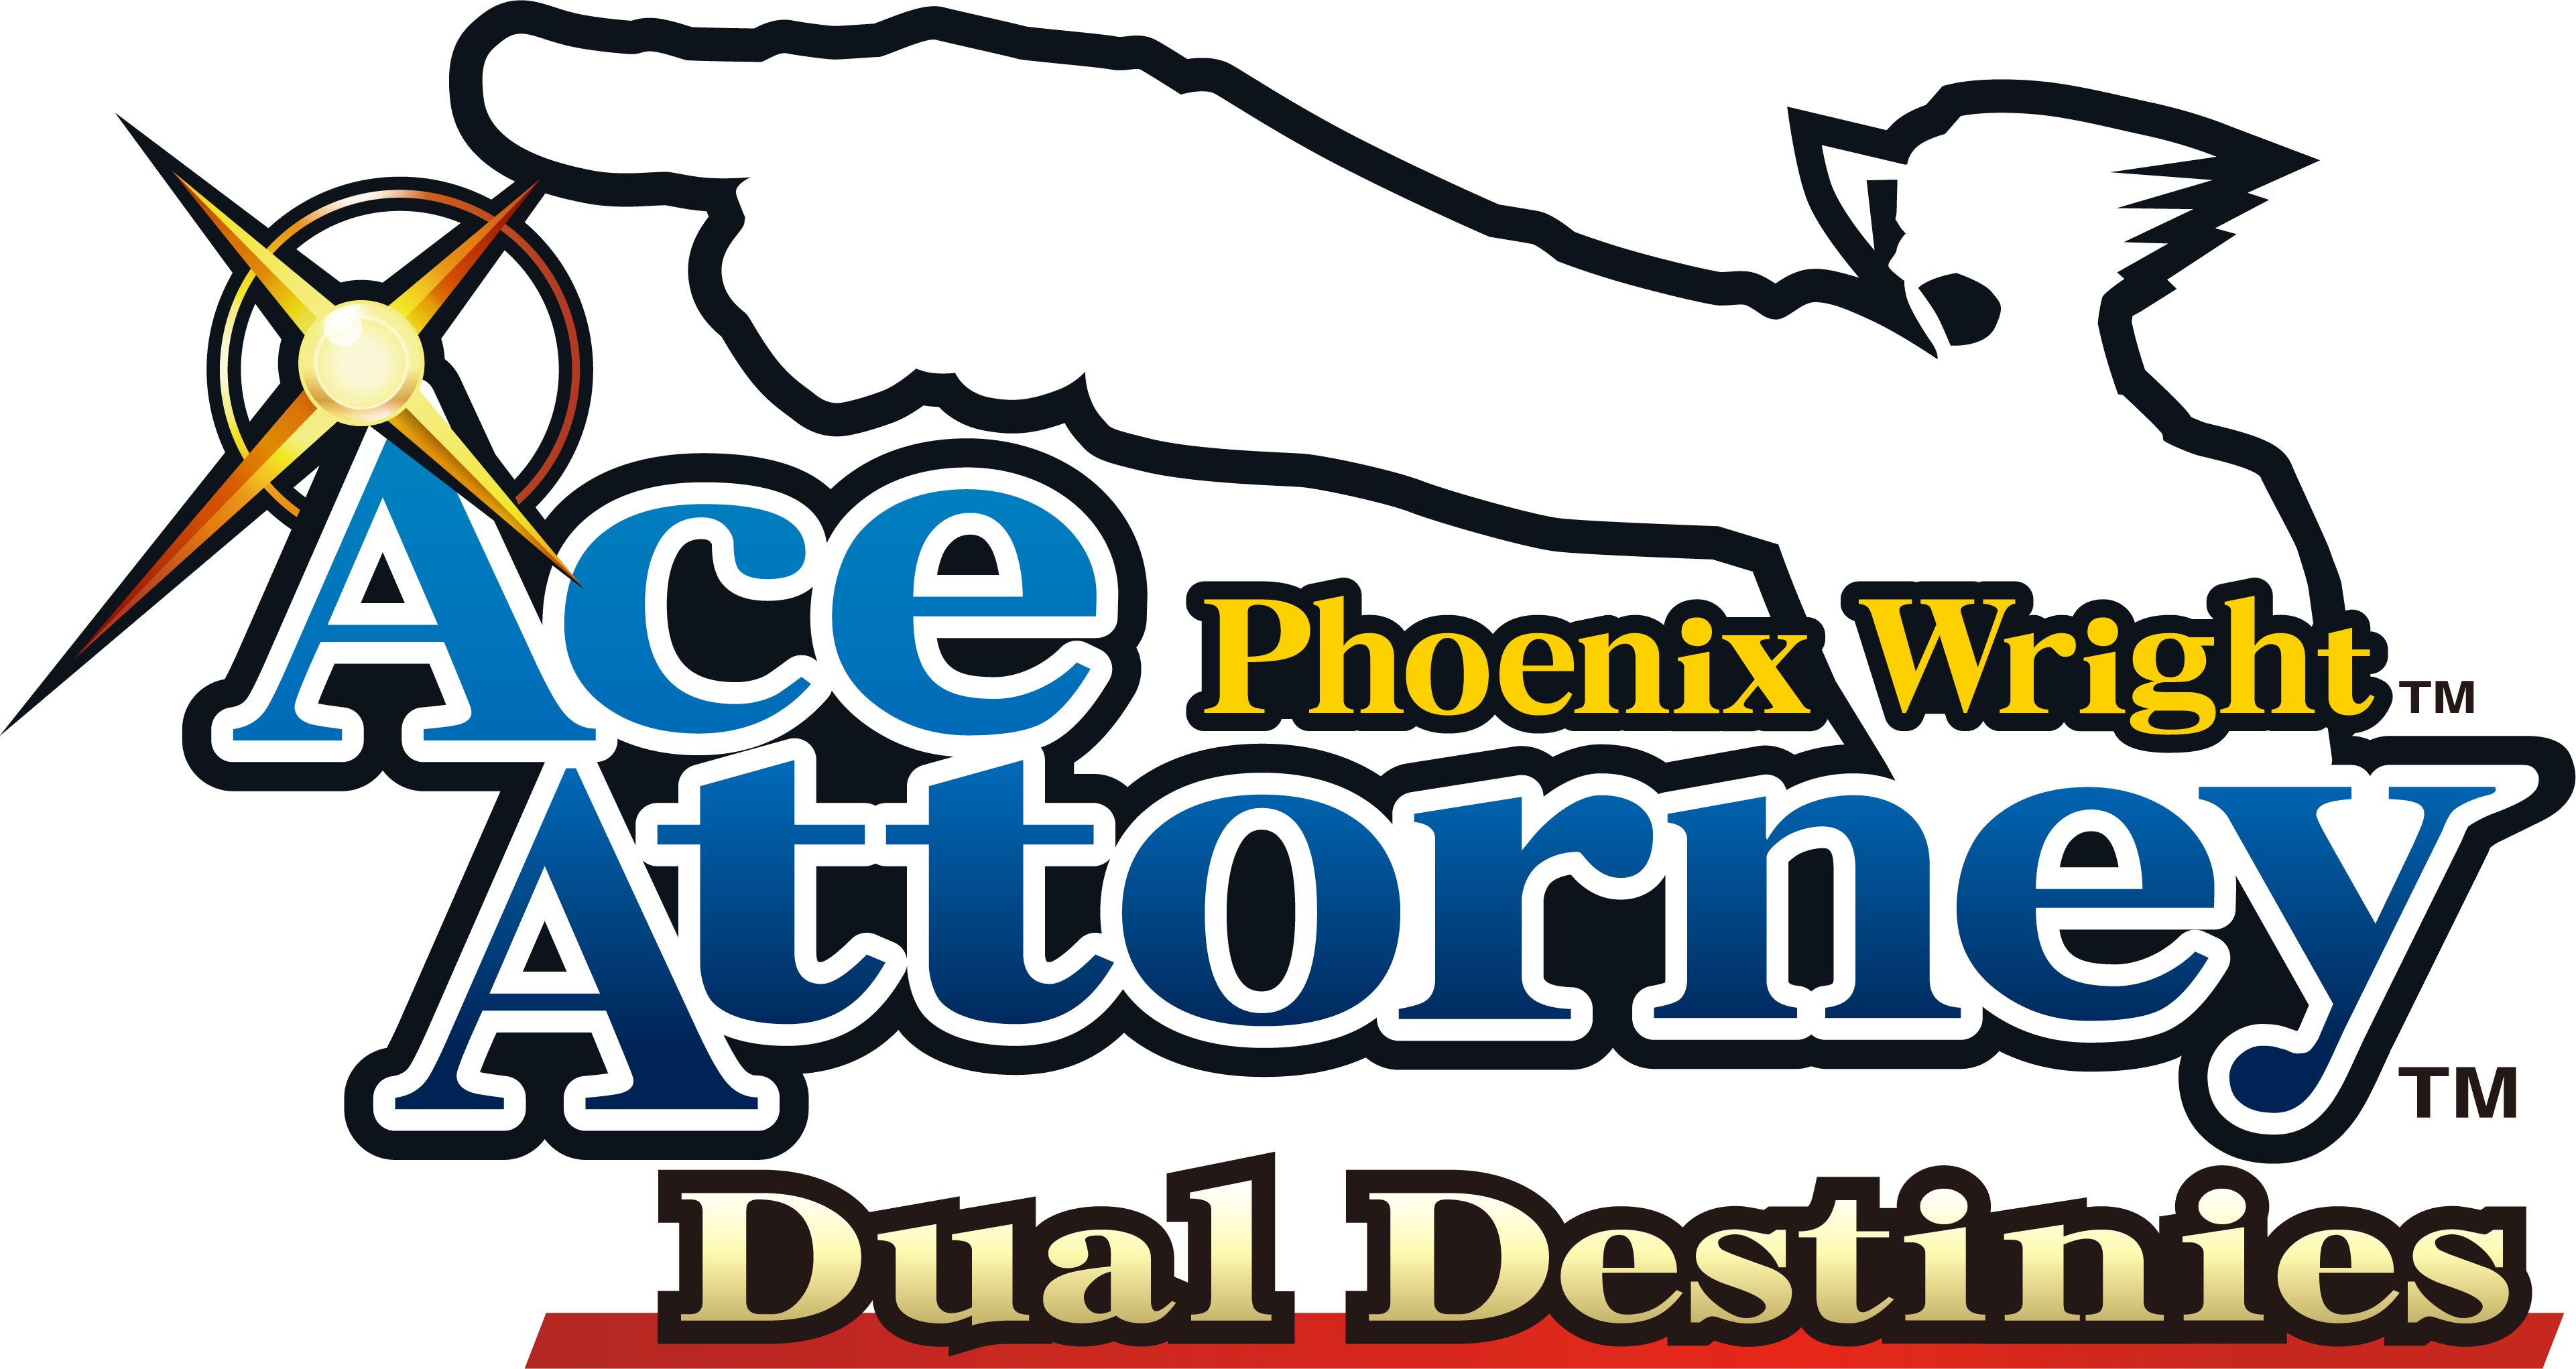 The Complete List of Ace Attorney Games in Chronological & Release